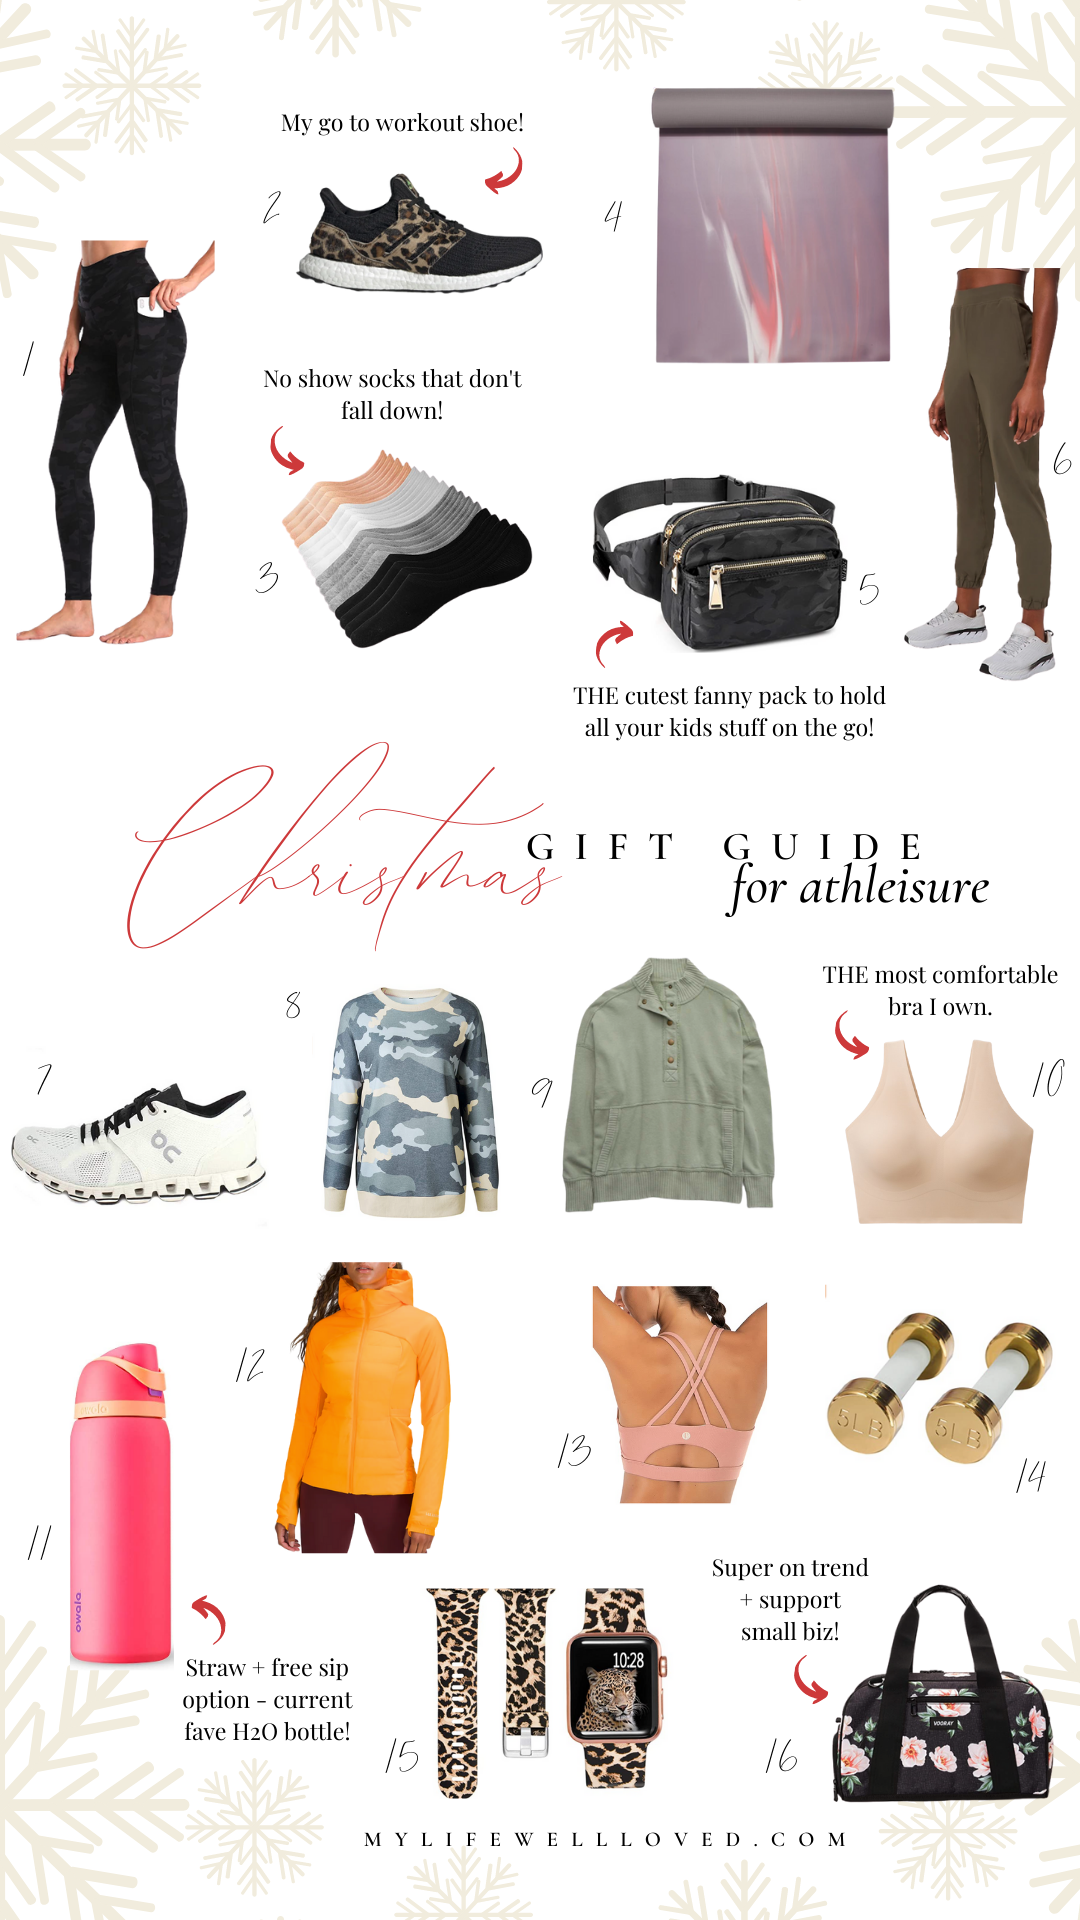 Gifts Under 25 Dollars For Her - Healthy By Heather Brown